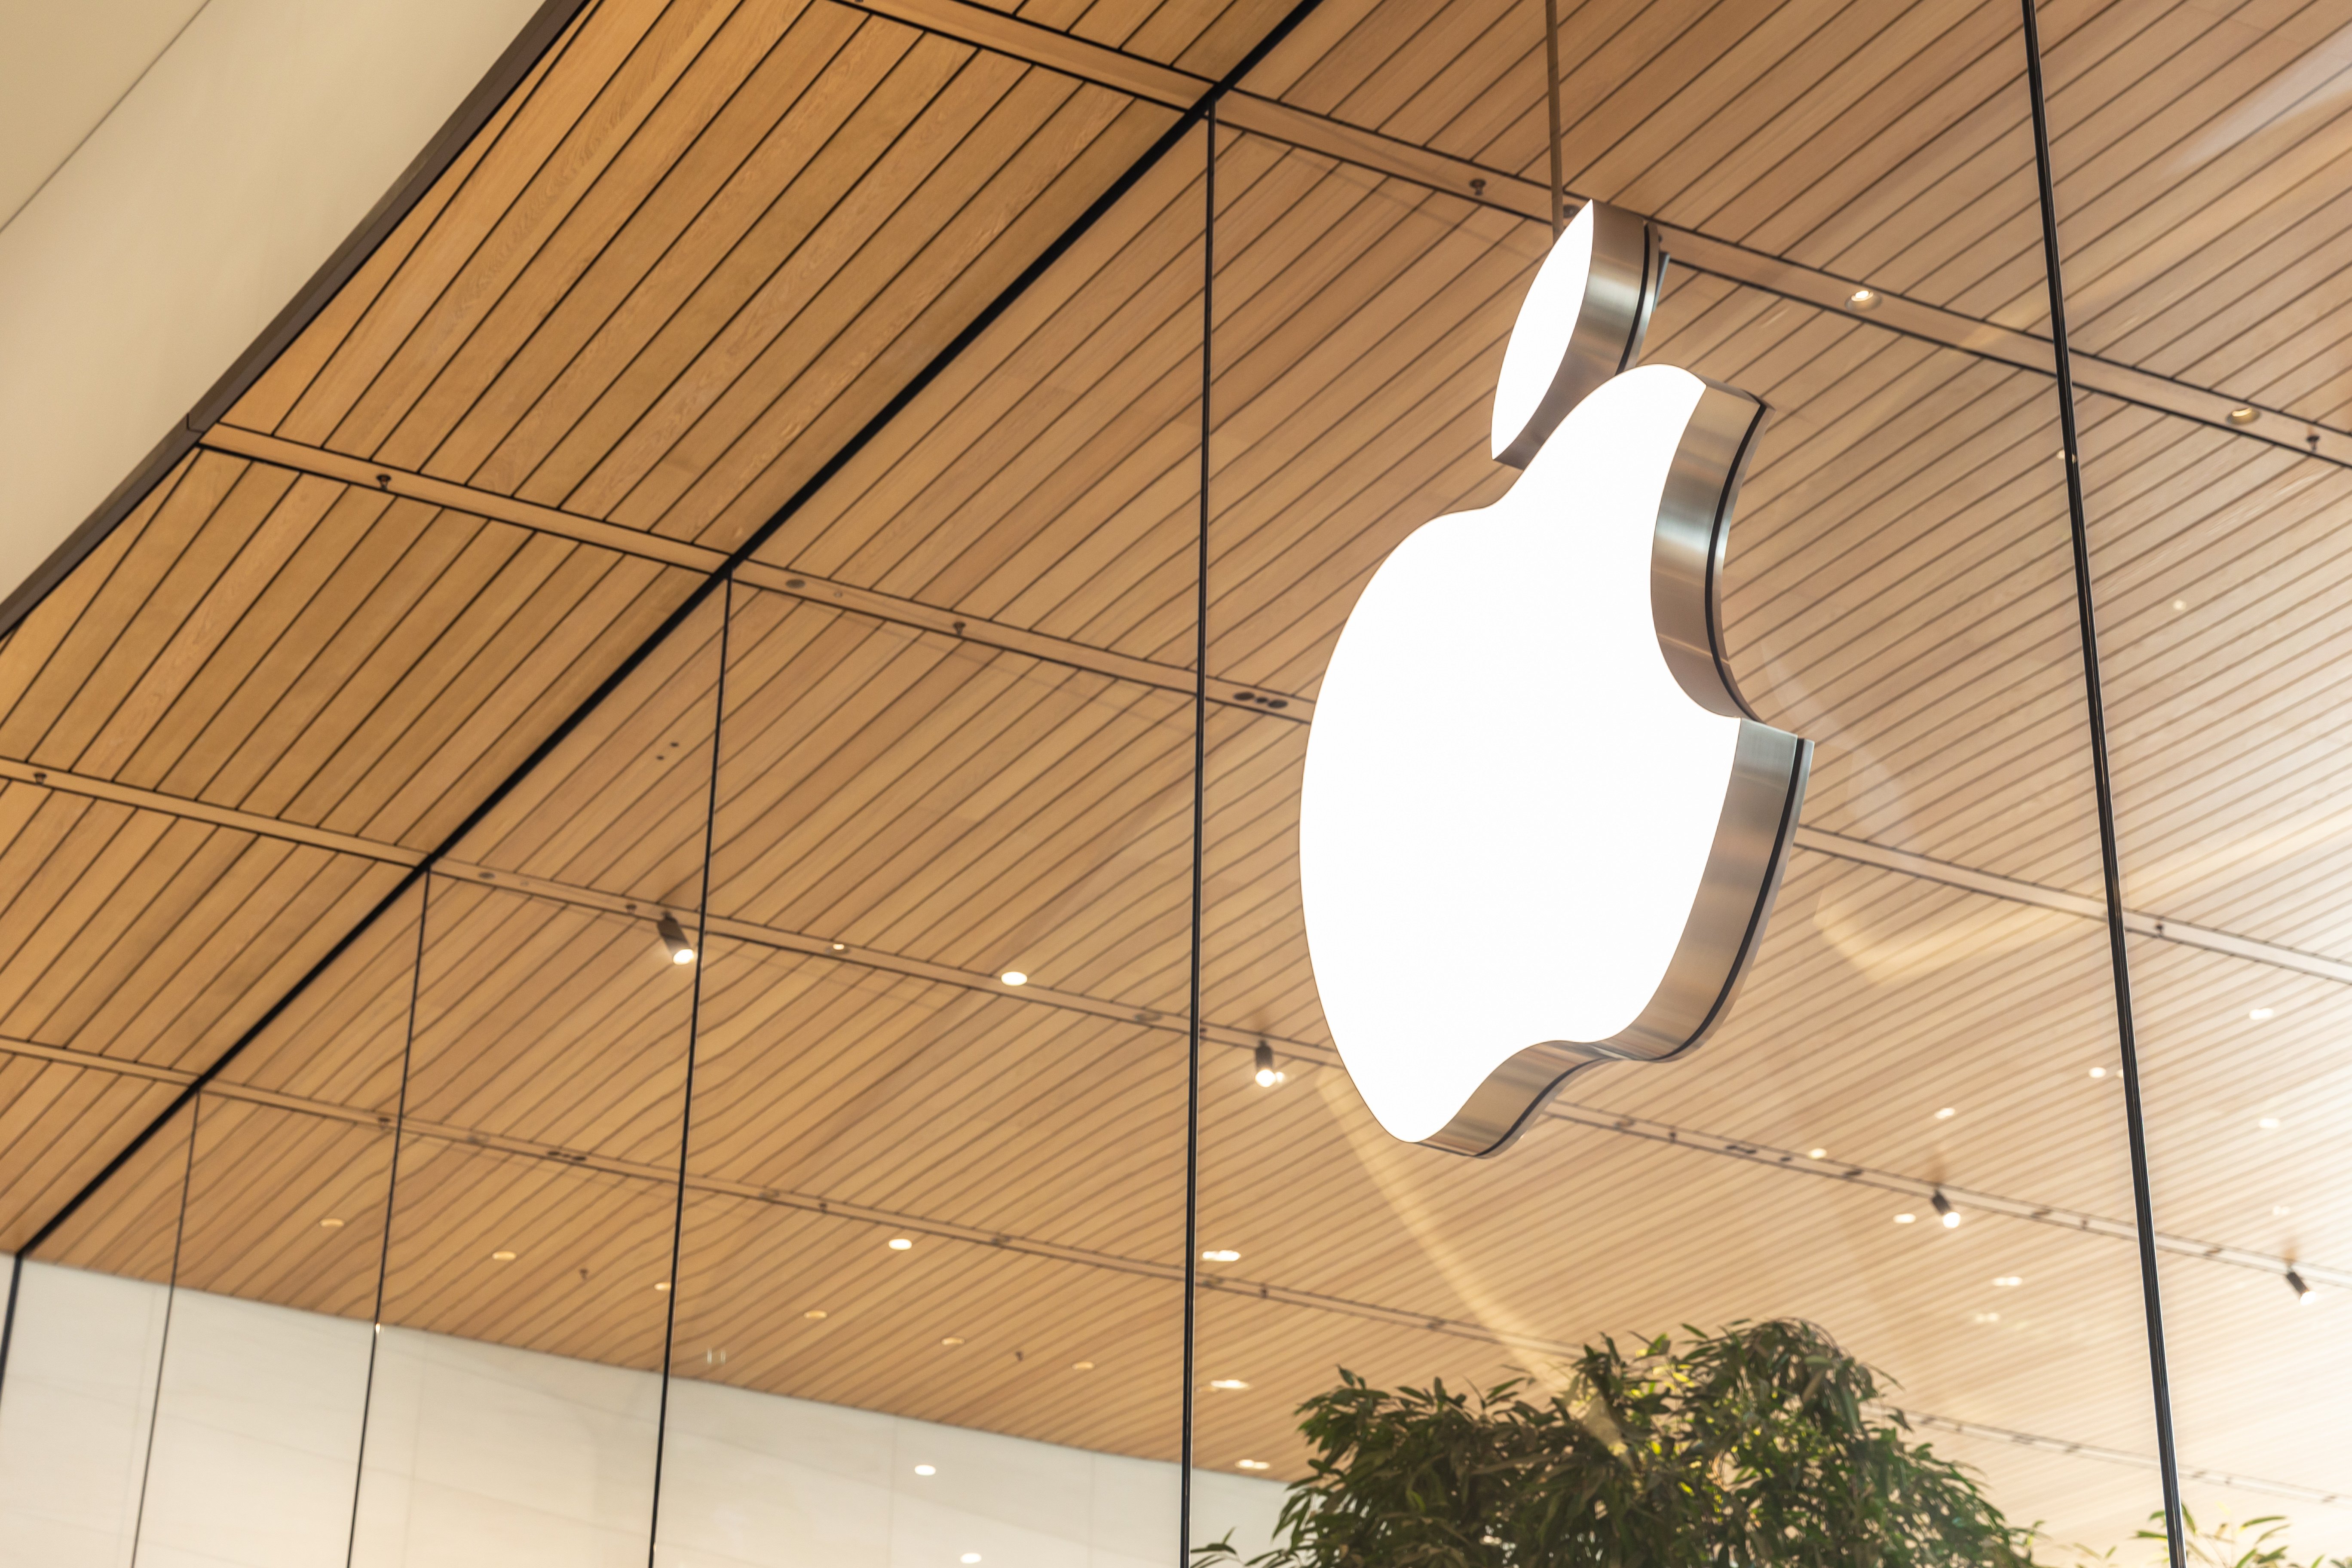 BREAKING: Apple CEO Says He Owns Bitcoin and Ether